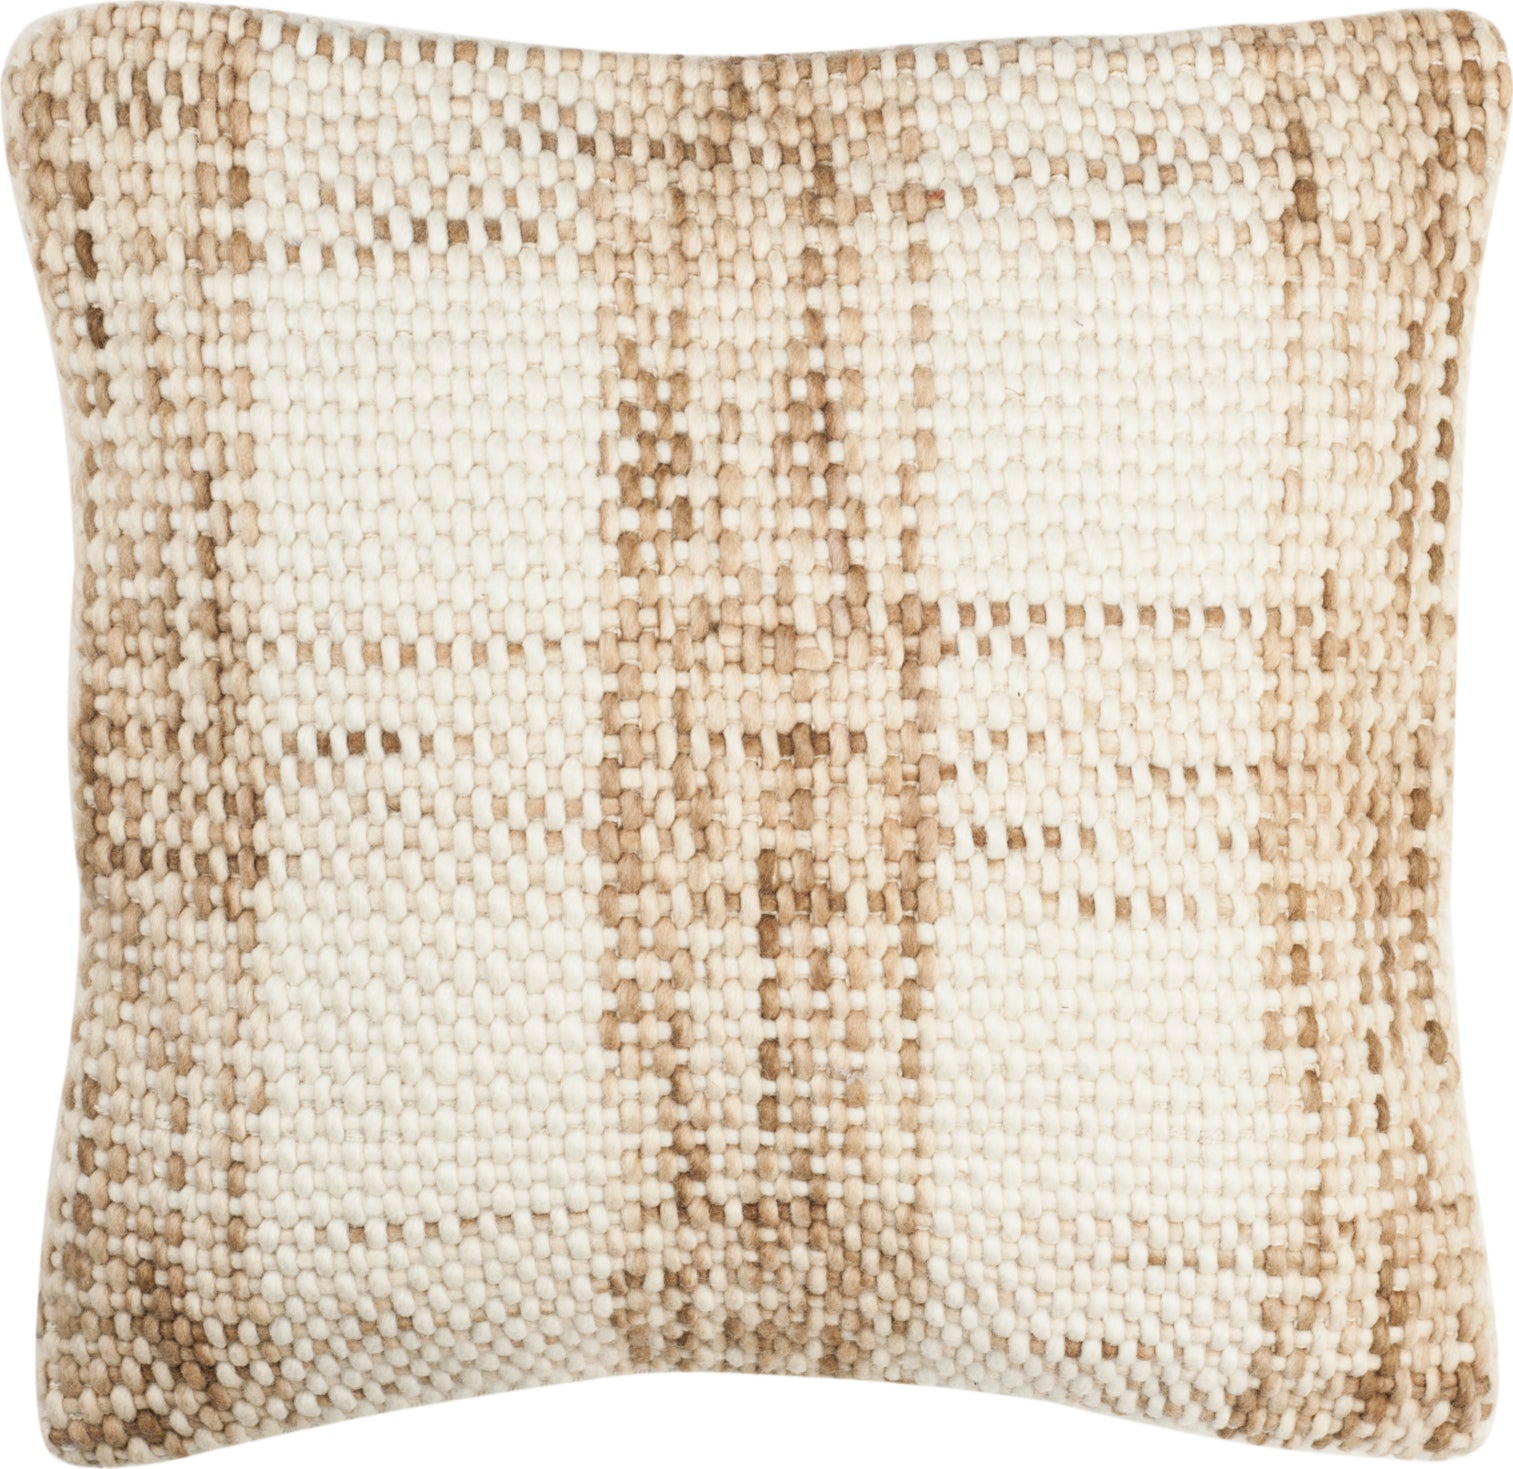 Safavieh Woven Plaid Textures and Weaves Eggshell Blend main image